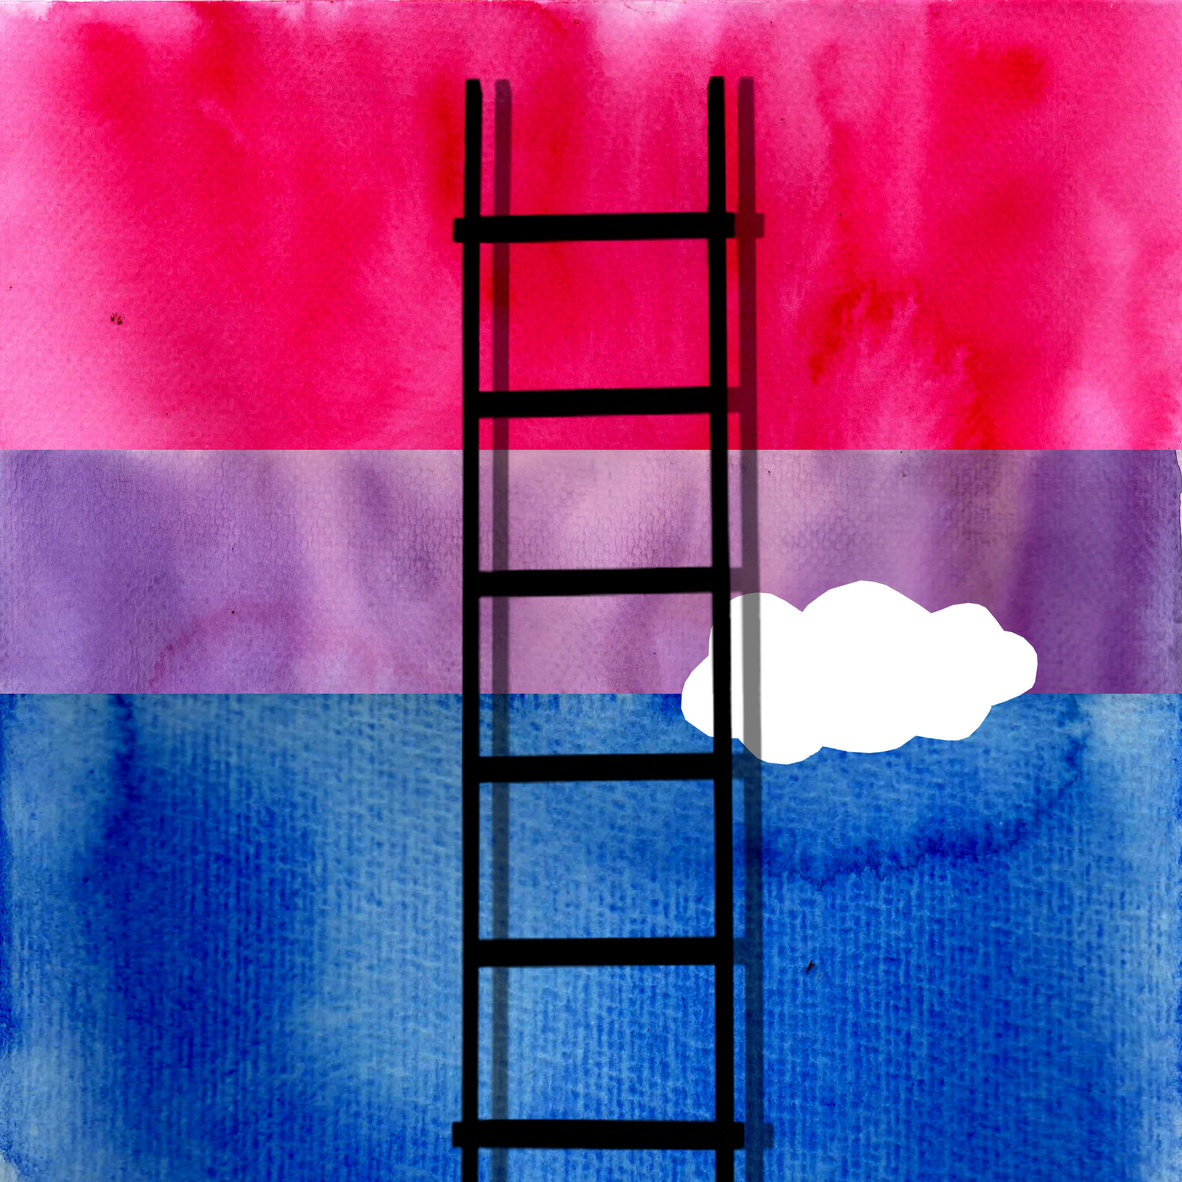 Illustration about bisexuality for Roseaux magazine